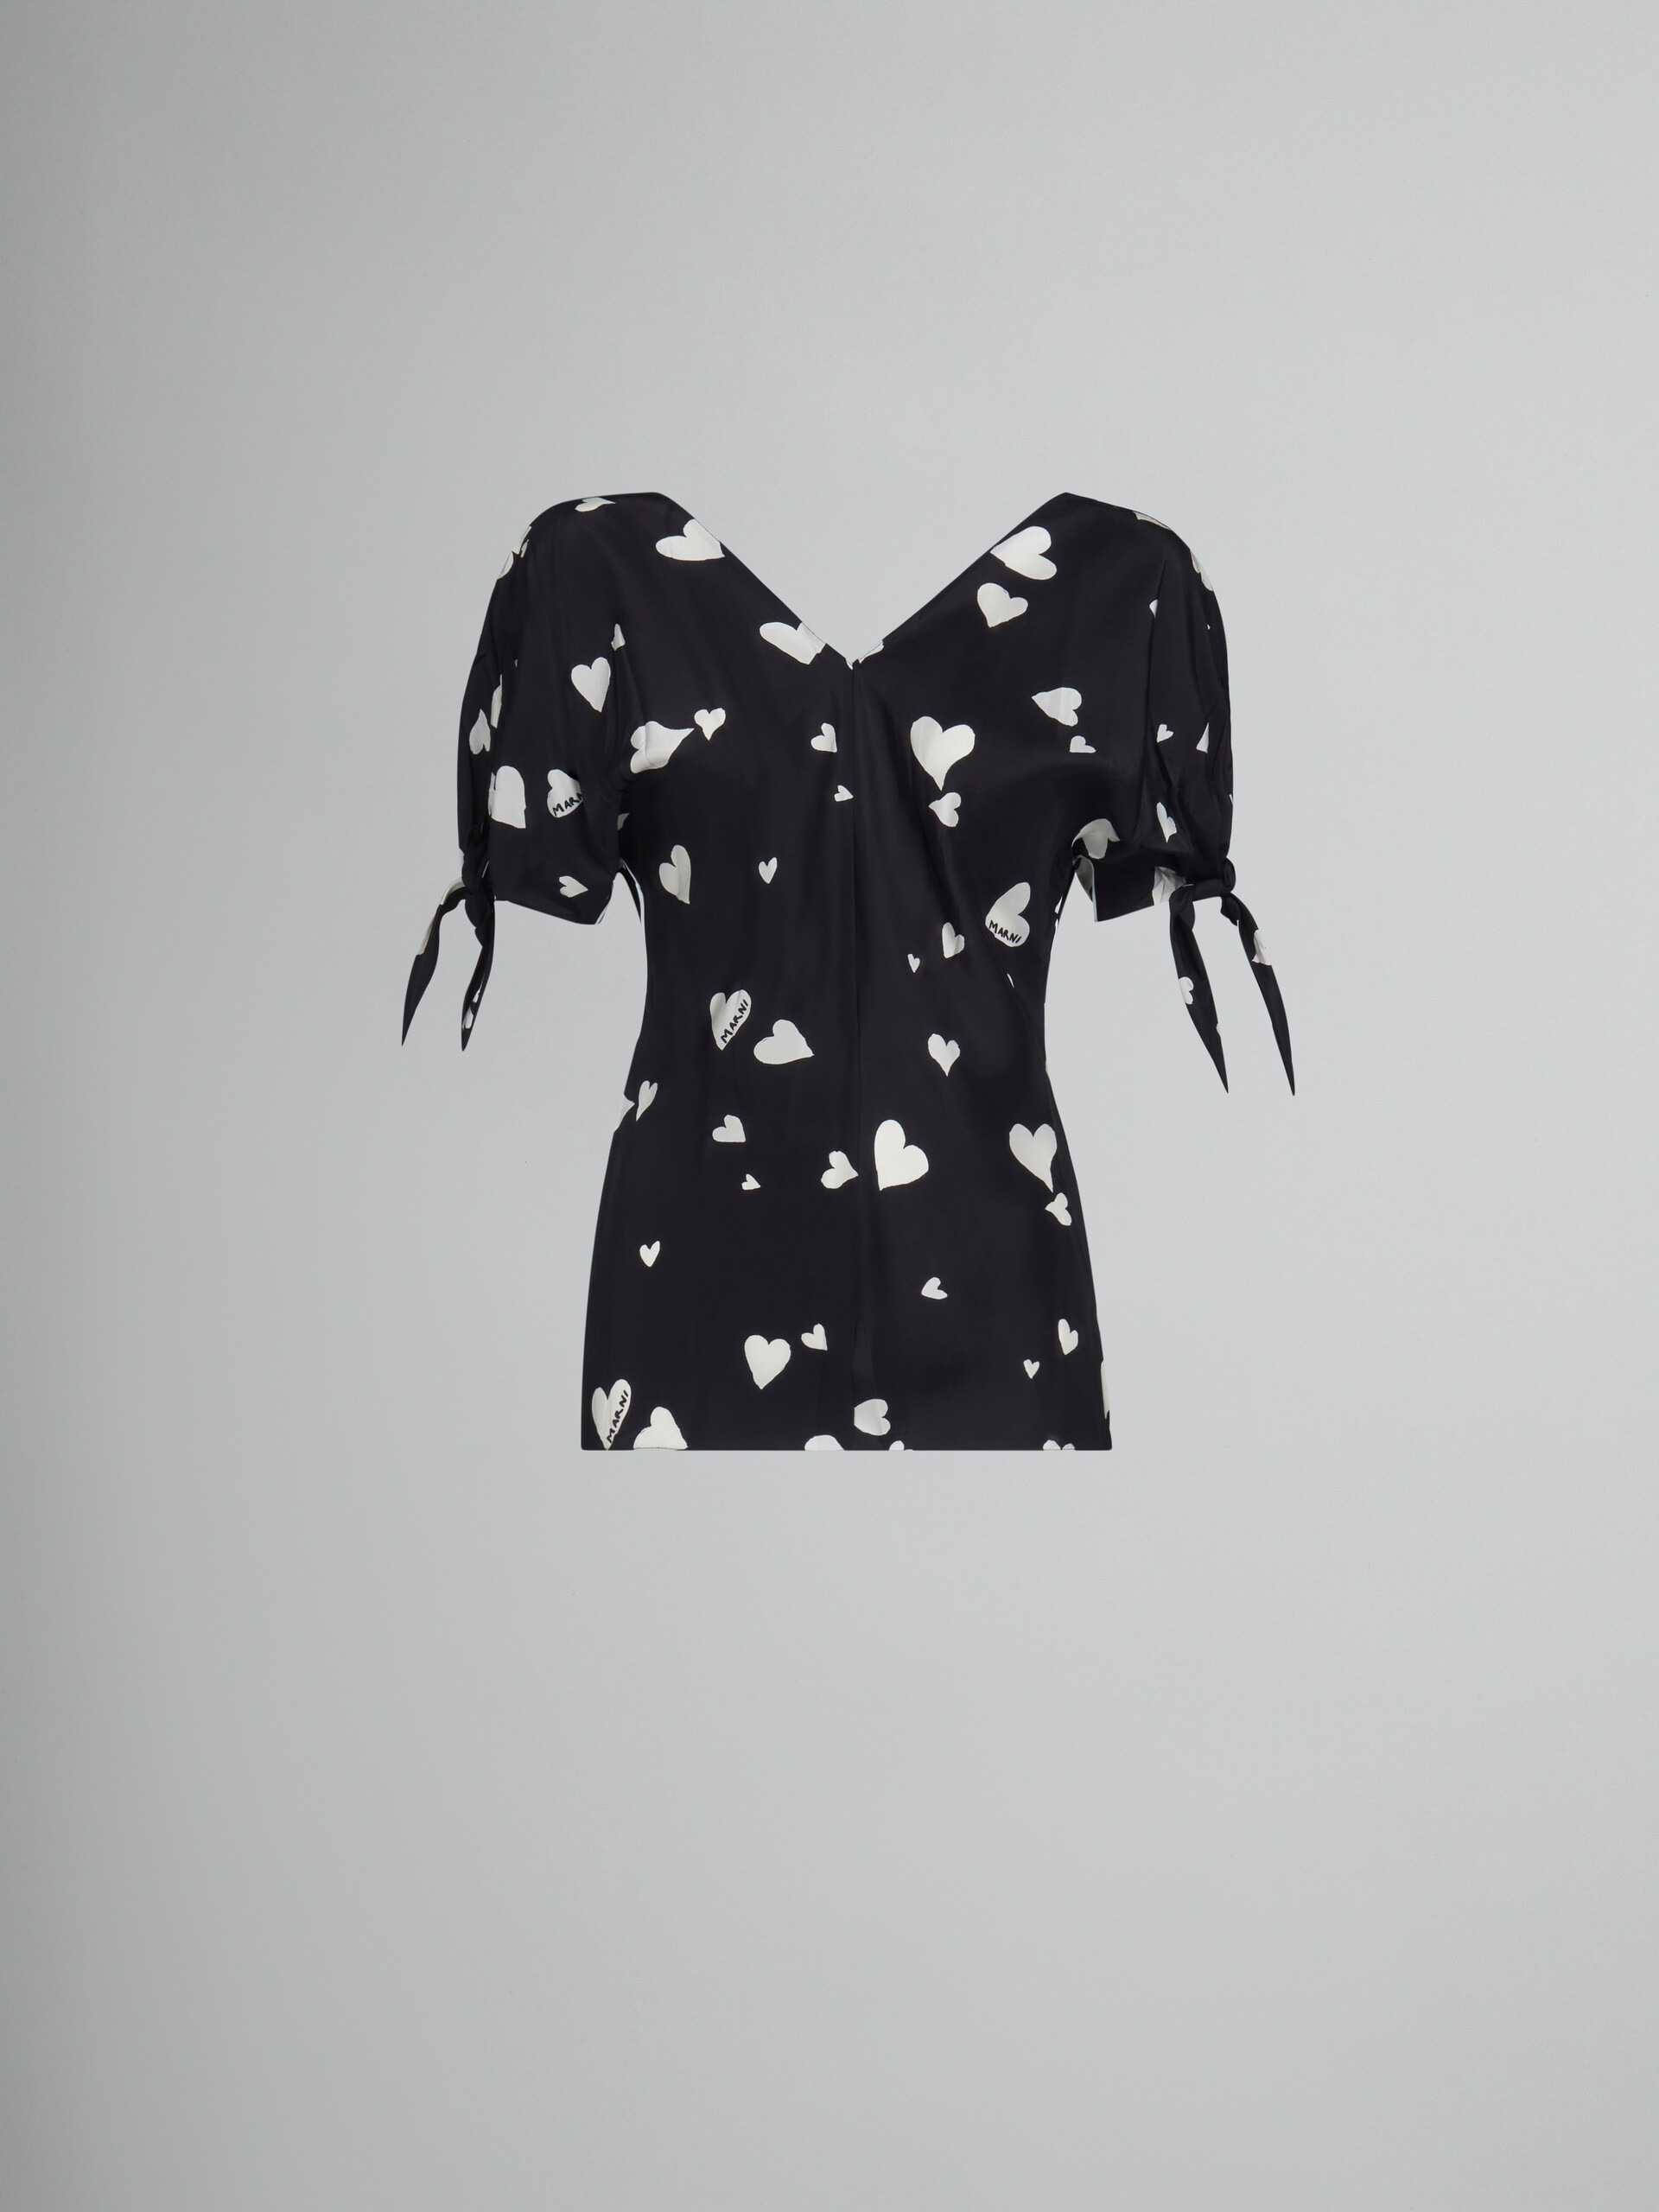 Black silk bow-sleeve top with Bunch of Hearts print - Shirts - Image 1